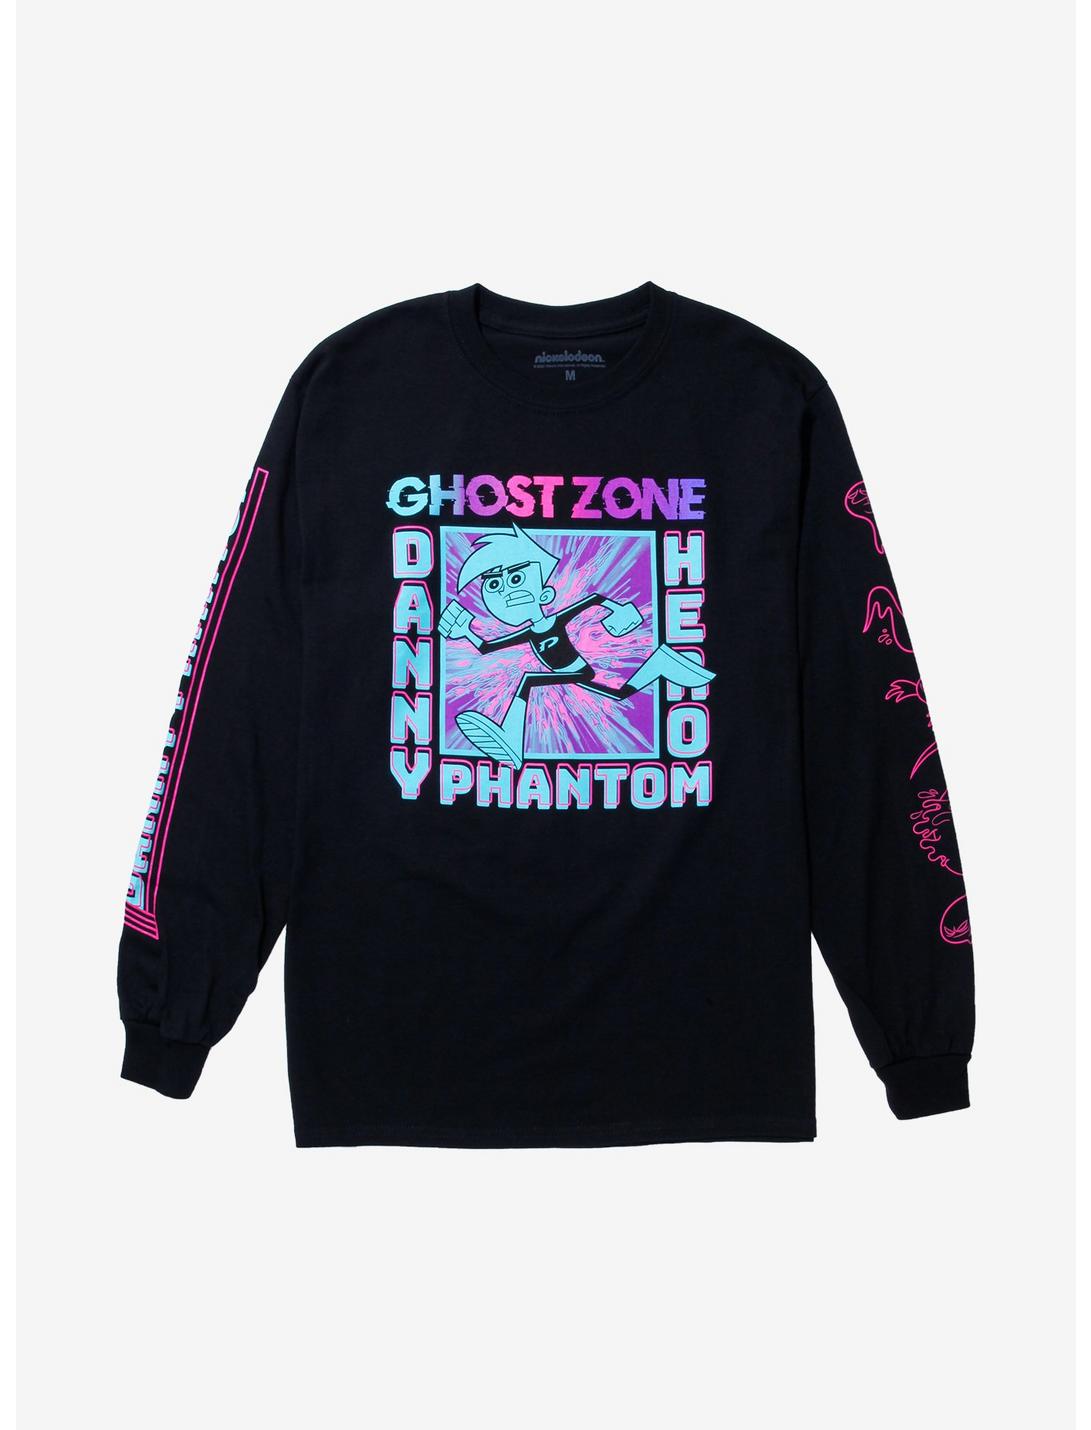 Danny Phantom Ghost Zone Long Sleeve T-Shirt - BoxLunch Exclusive, BLACK, hi-res